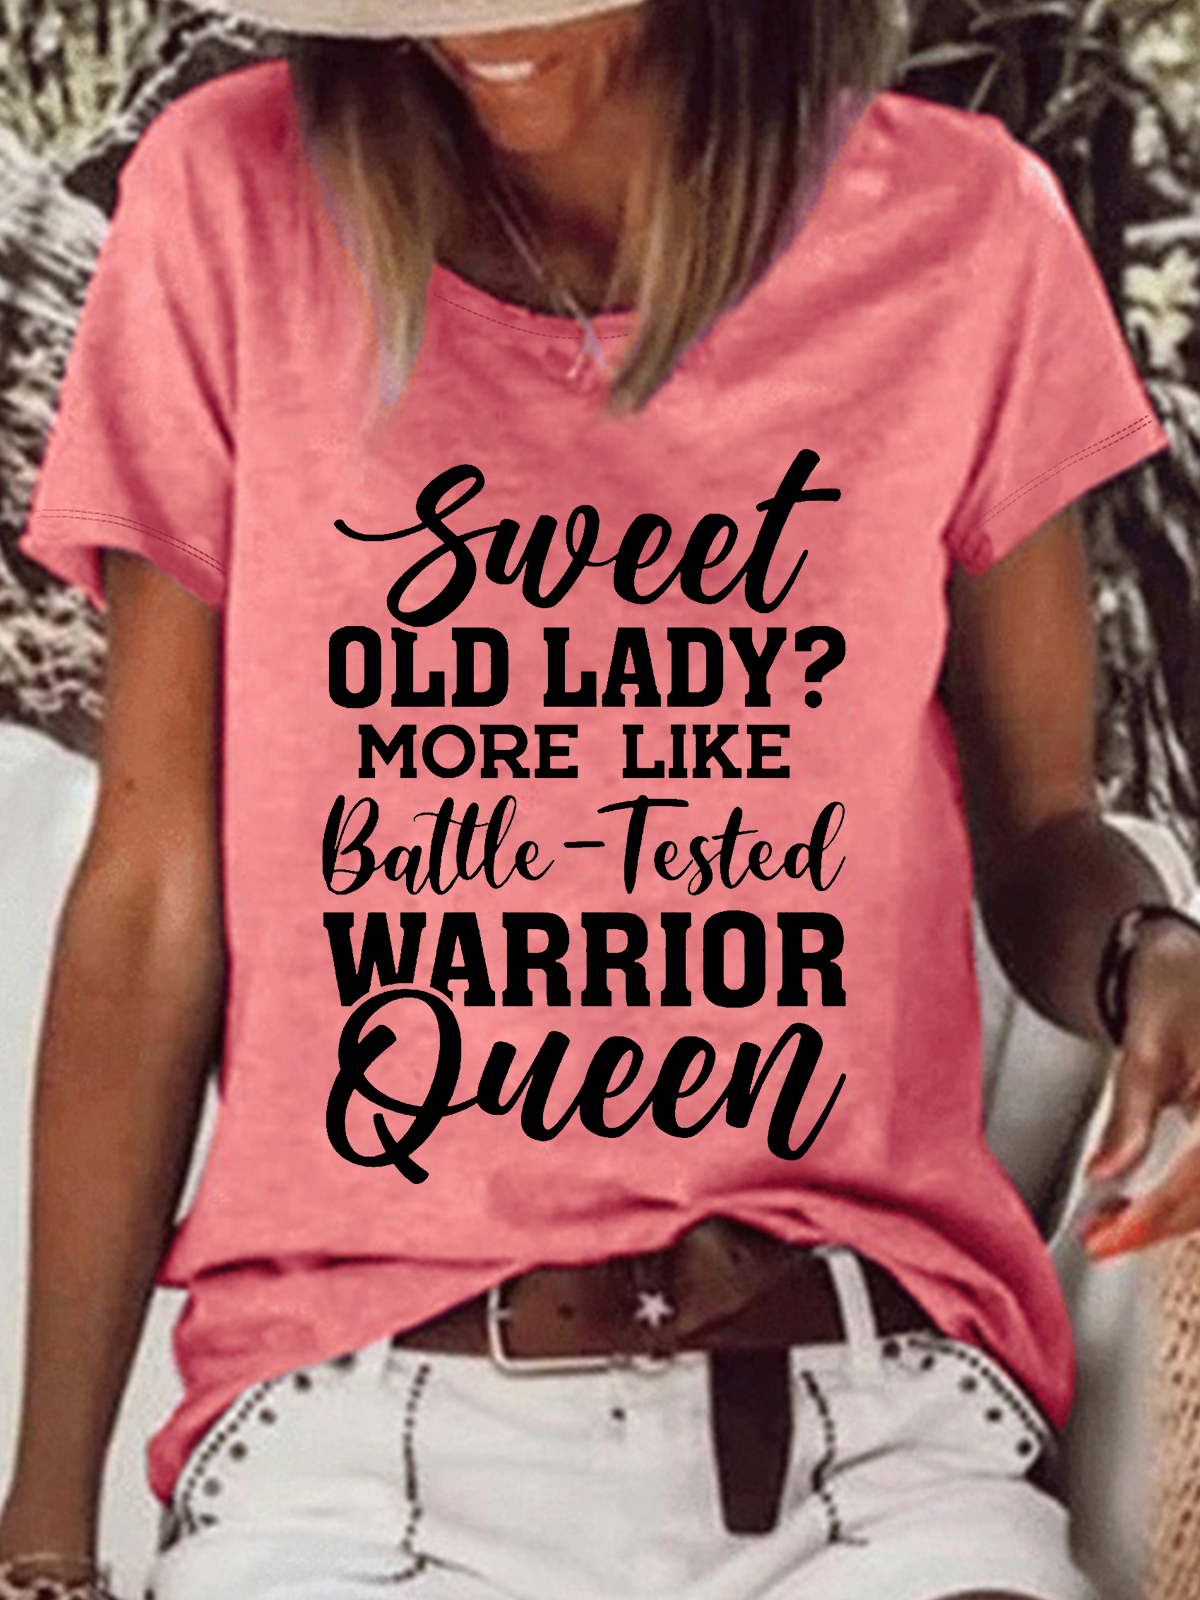 Women's Sweet Old Lady? More Like Battle Tested Warrior Queen Casual Loose T-Shirt